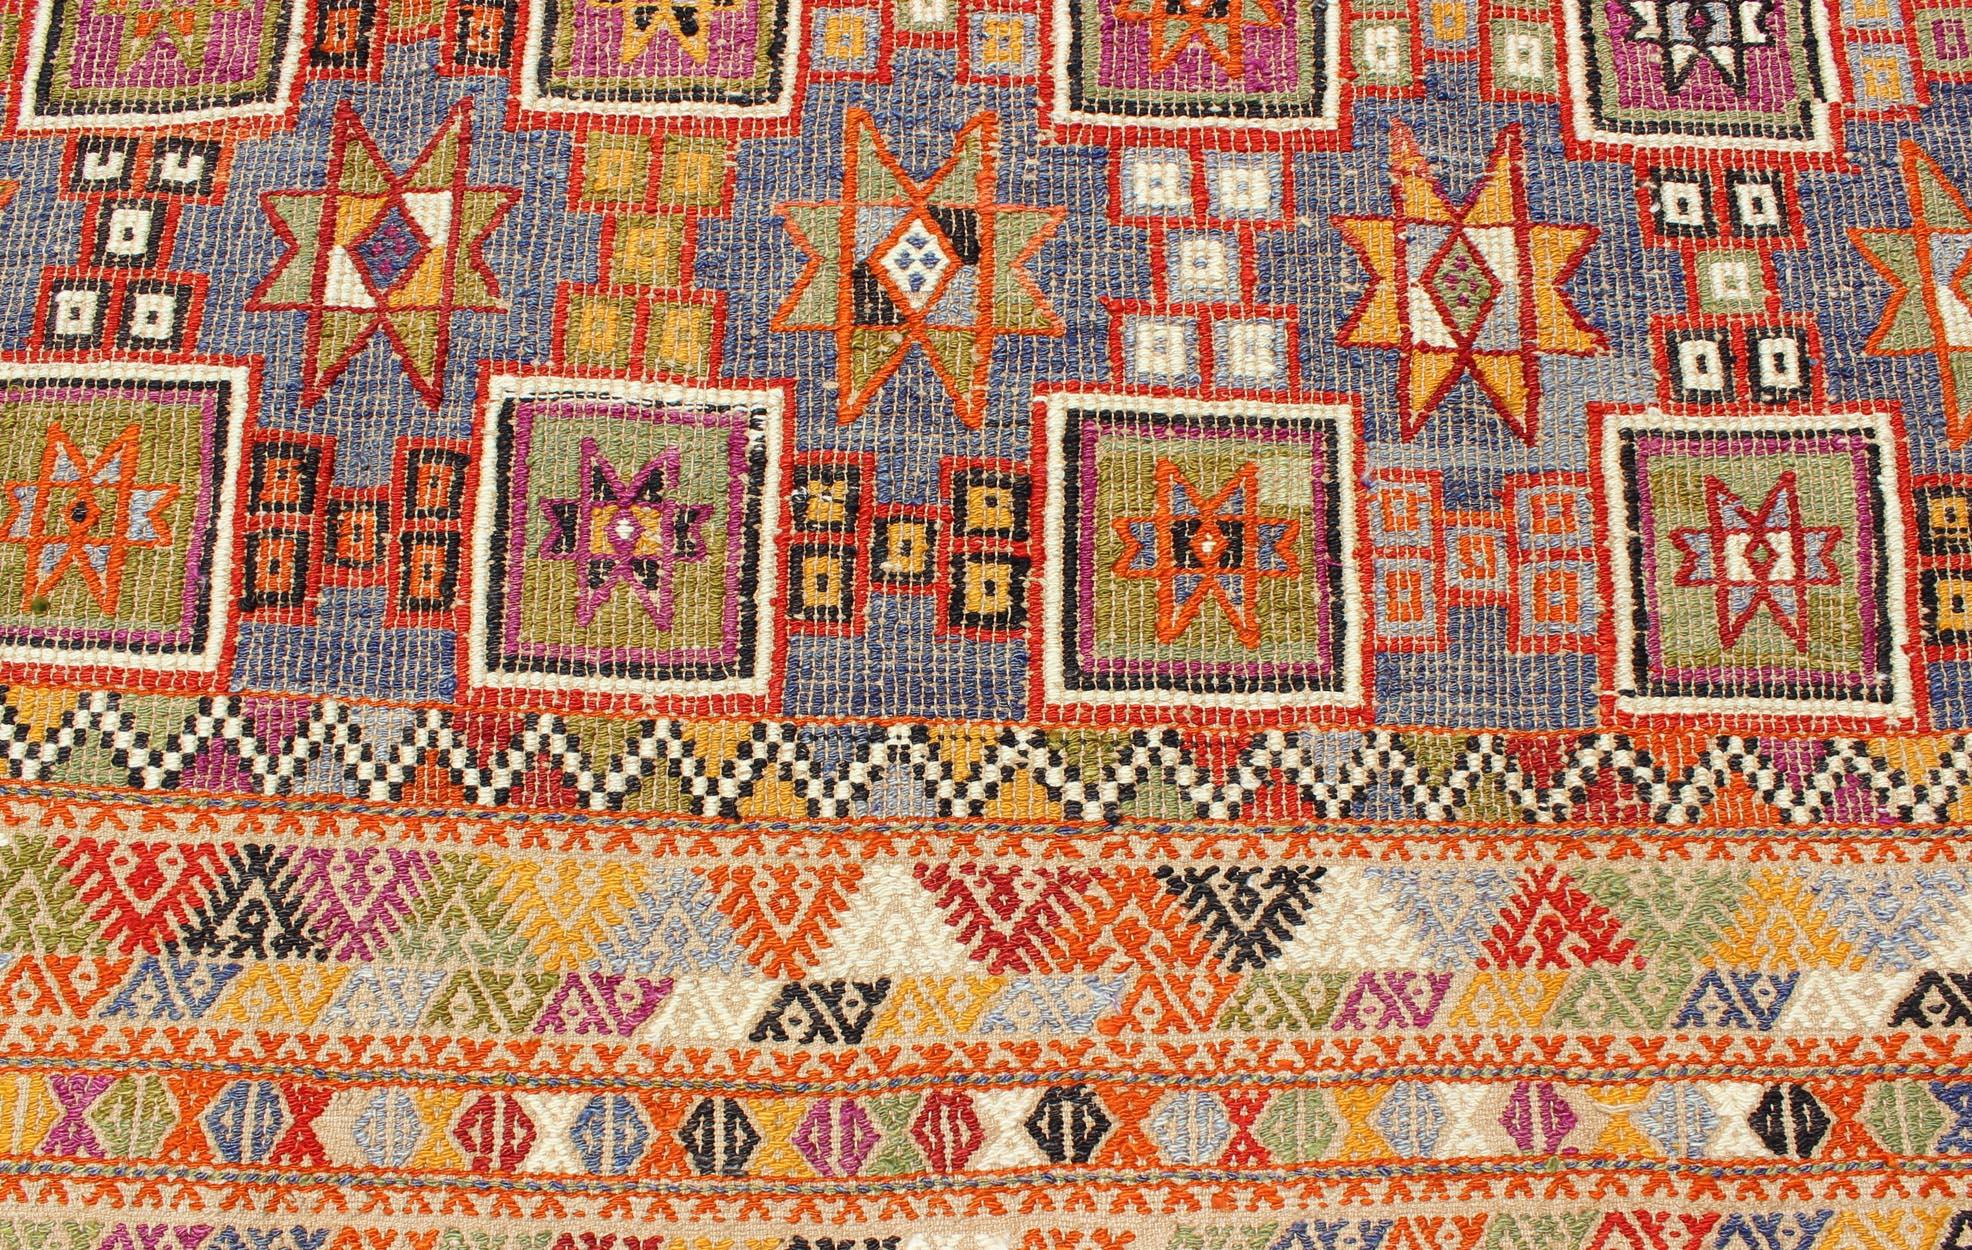 Mid-20th Century Vintage Embroidered Flat Weave Kilim Rug with Geometrics and Squared Design